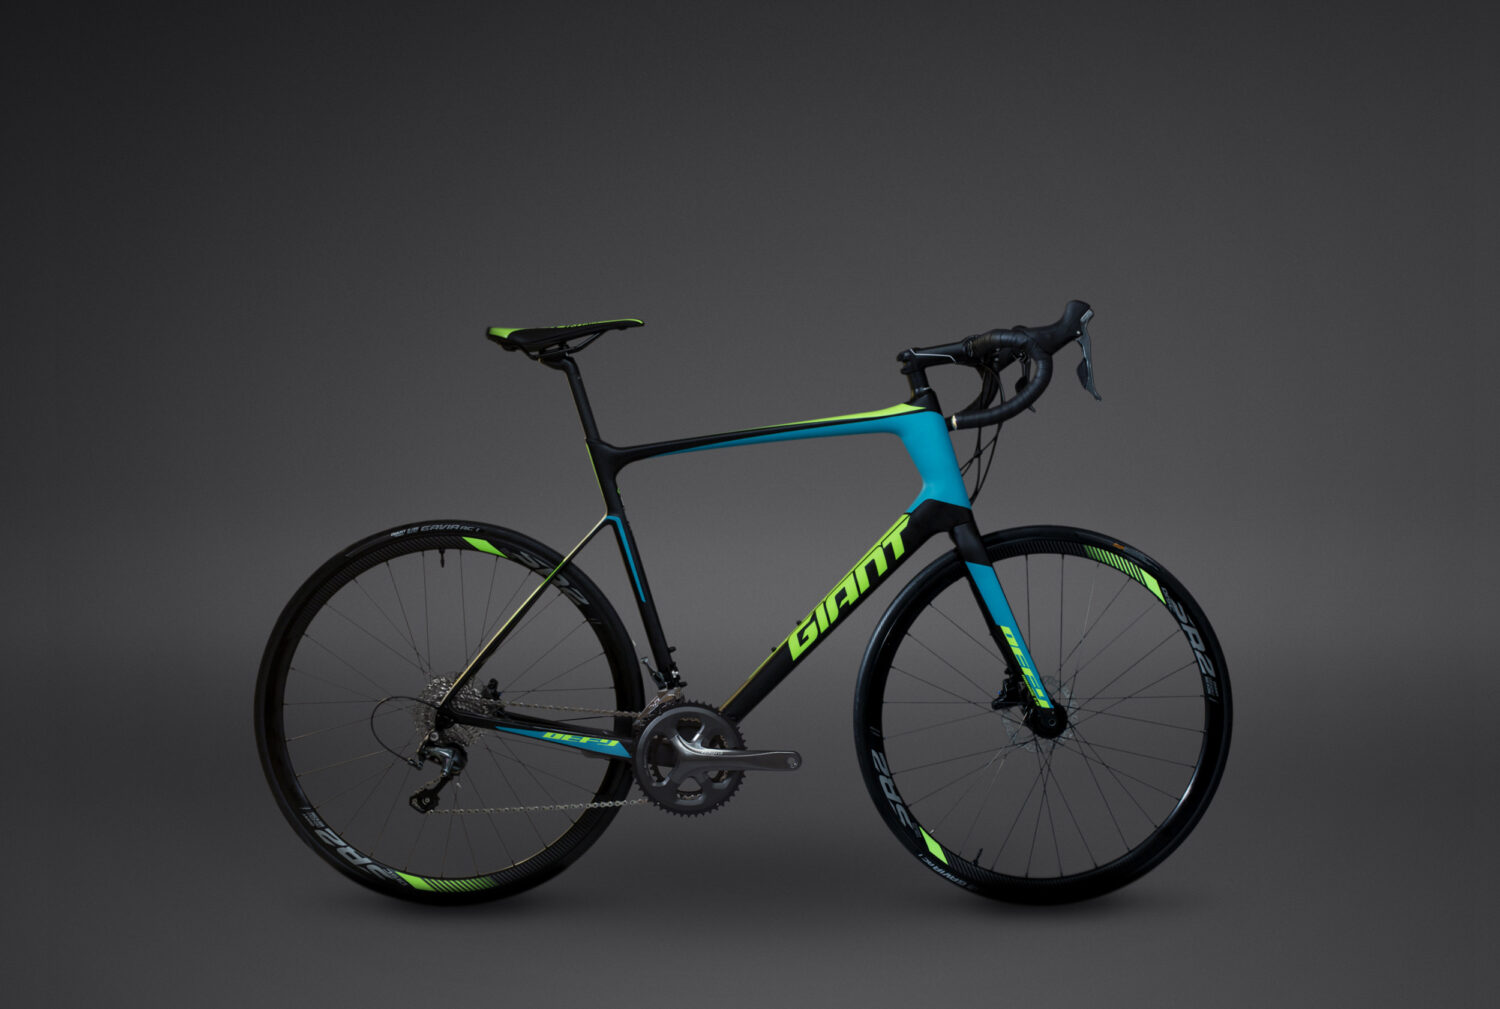 Commercial Product Photo Shoot for Giant Defy Road Bike